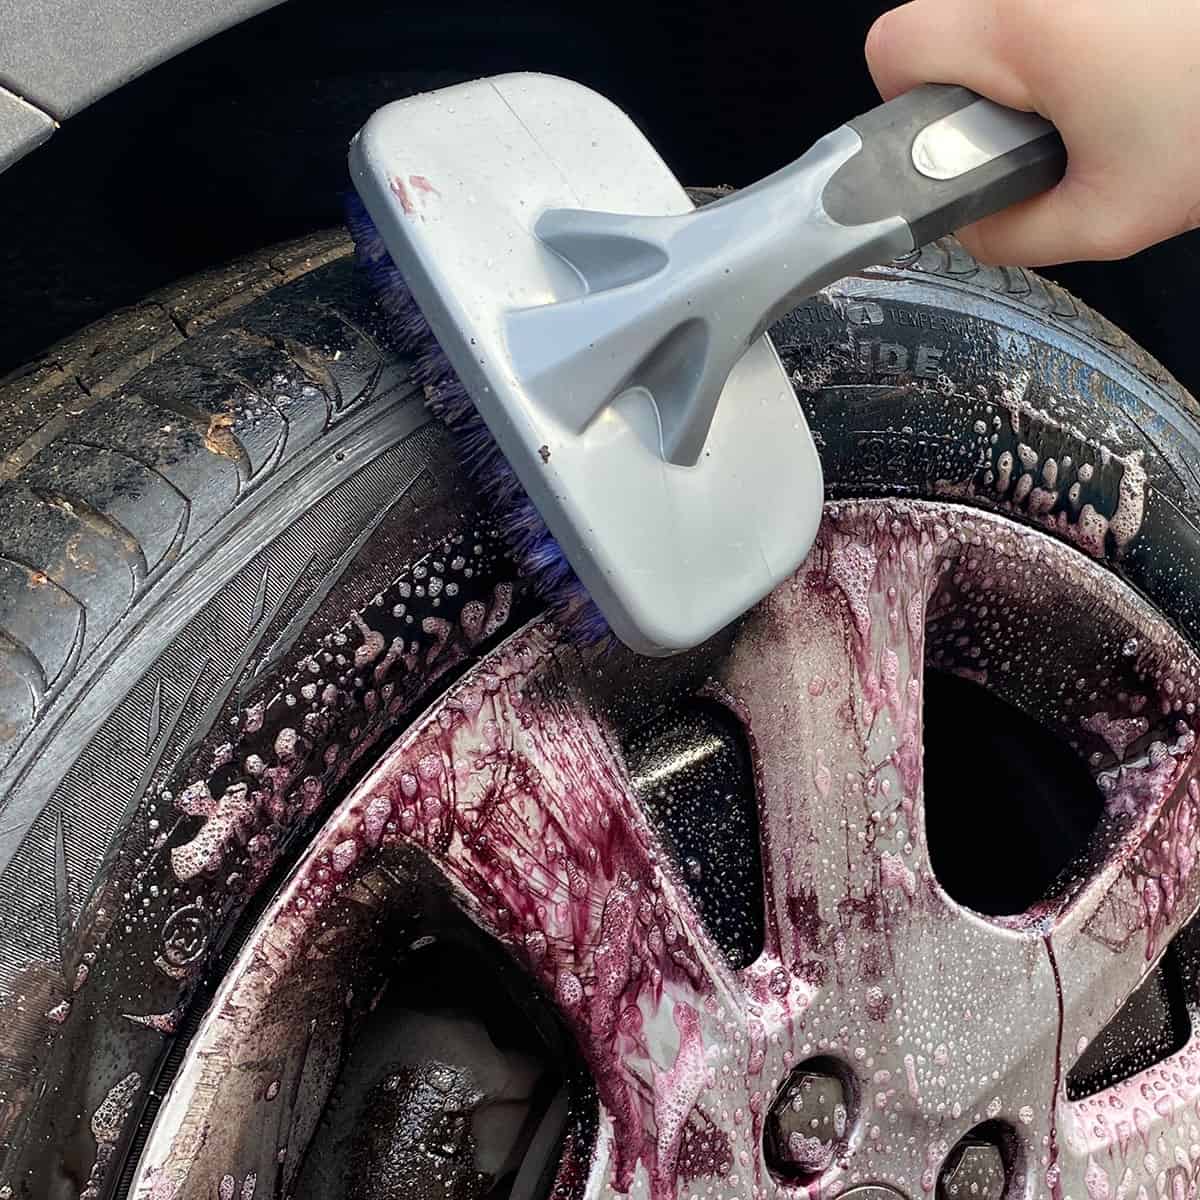 Chemical Guys Curved Tyre Brush in action